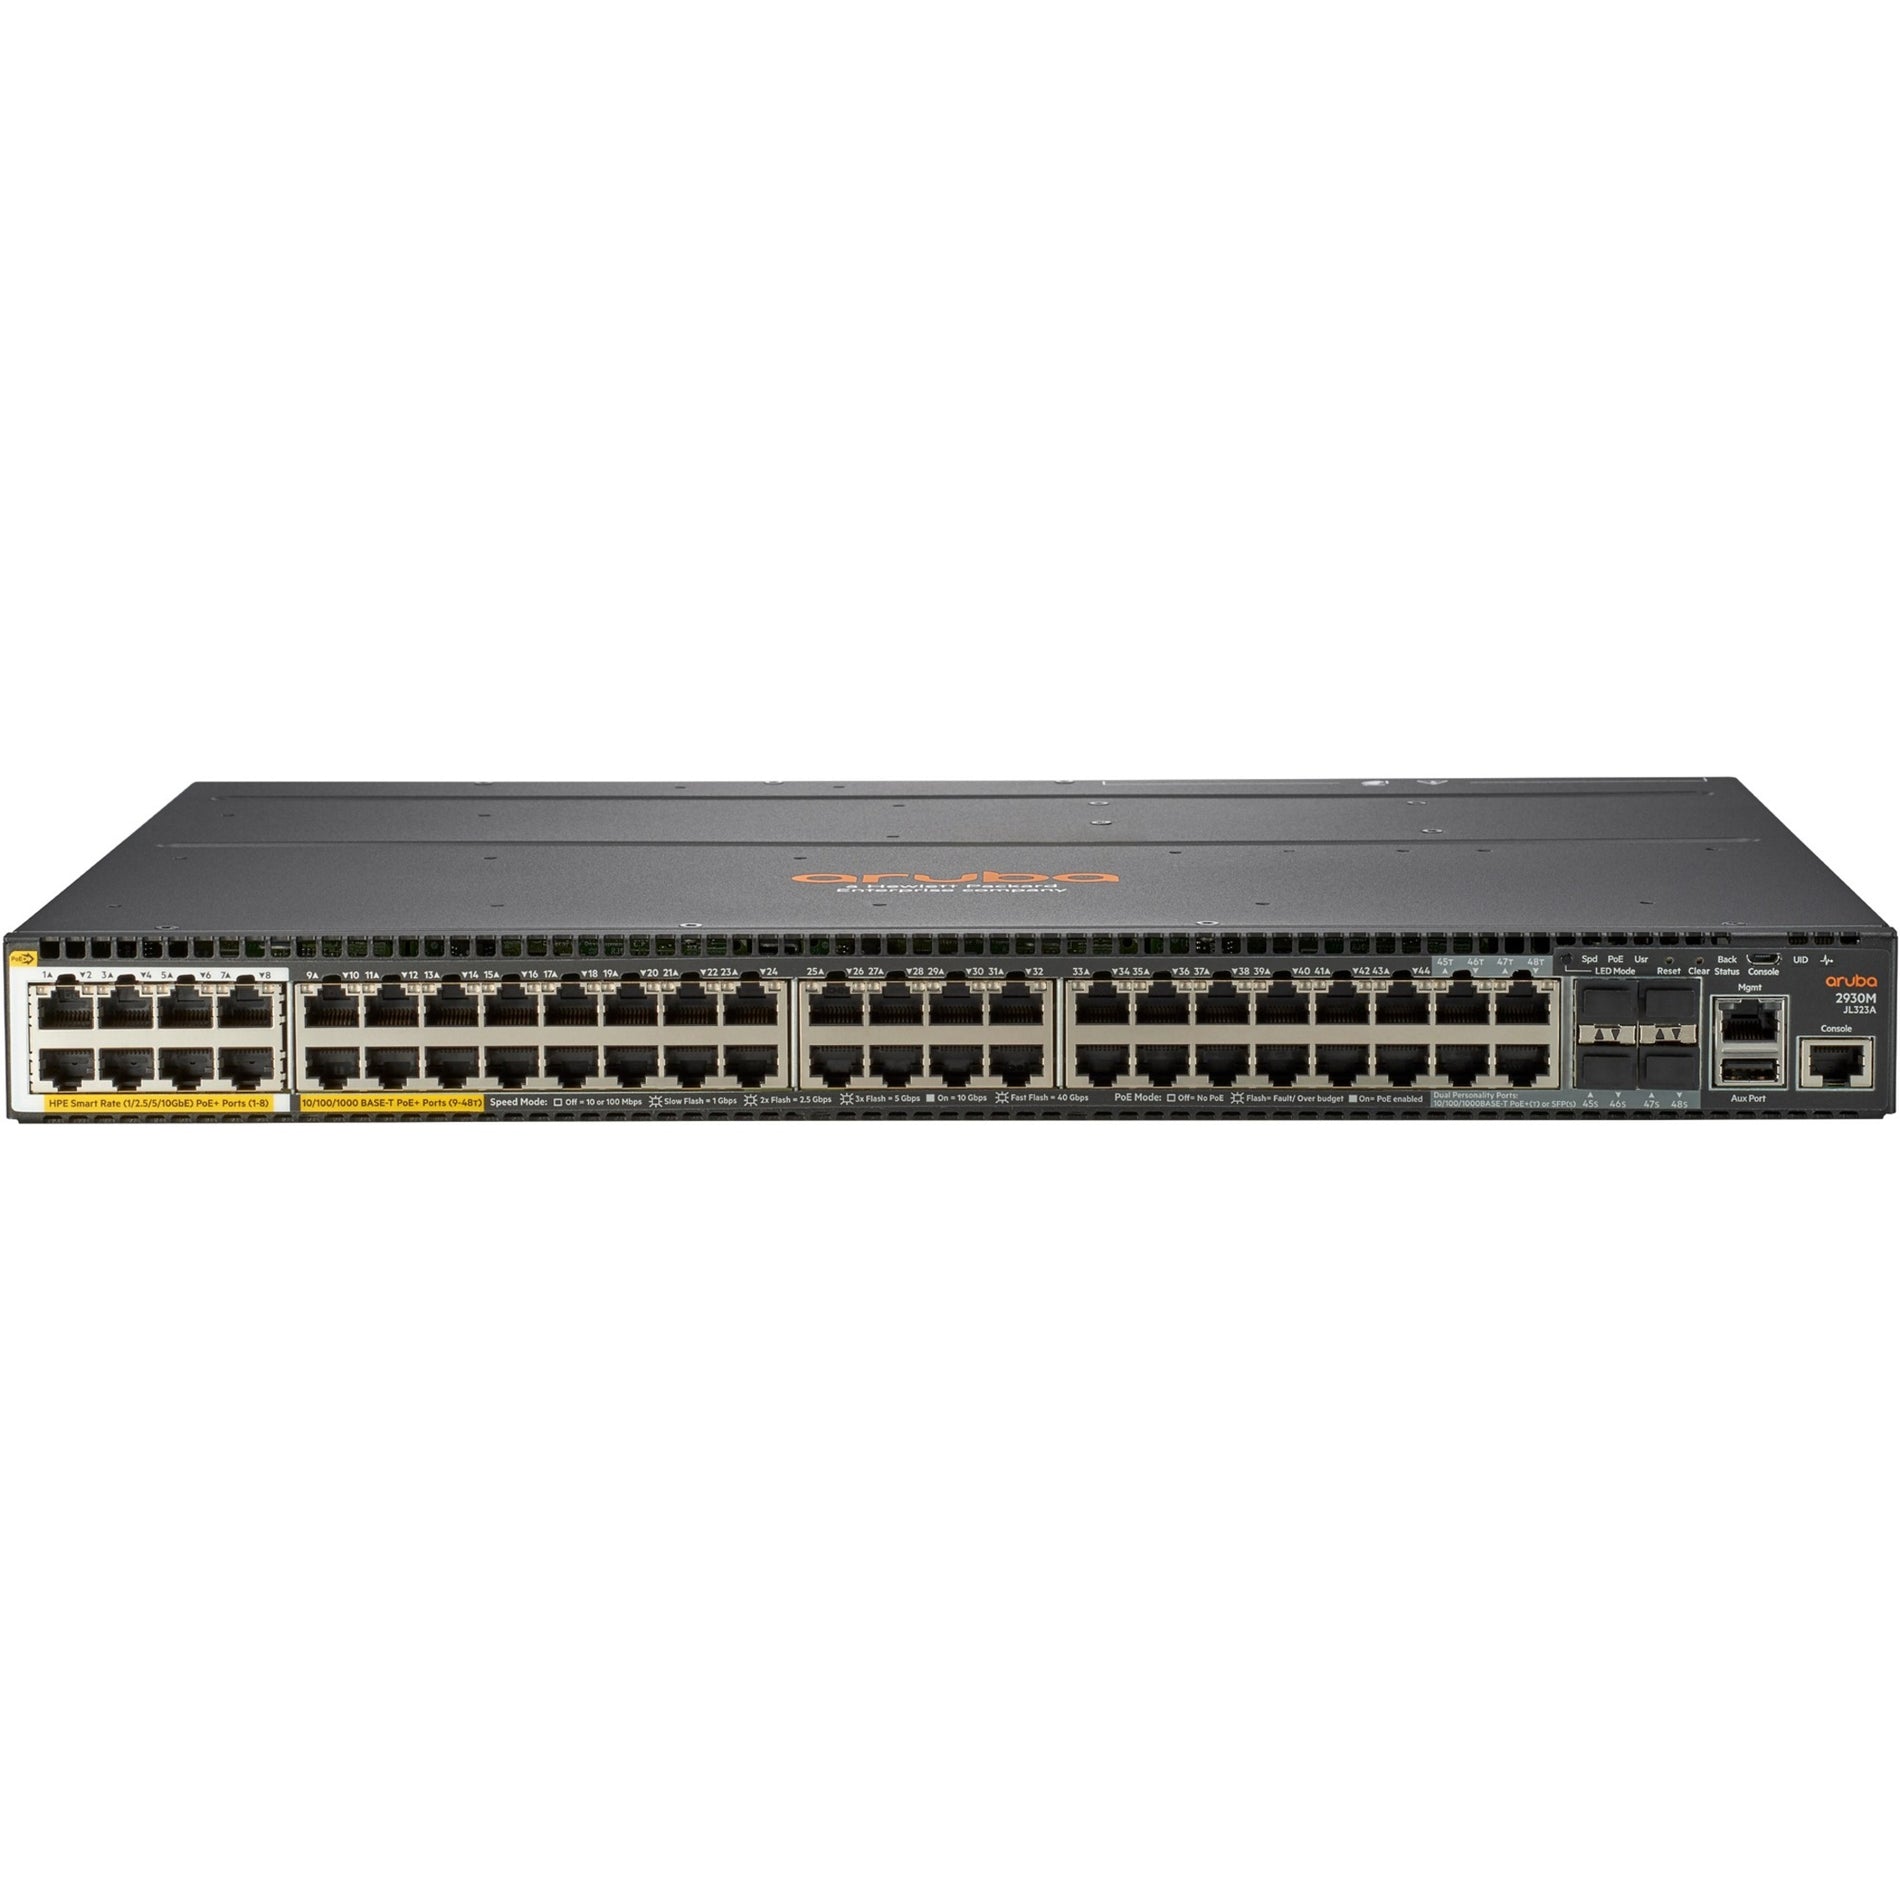 HPE JL323A 2930M 40G 8 Smart Rate PoE+ 1-Slot Switch, 48 Network Ports, Lifetime Warranty [Discontinued]